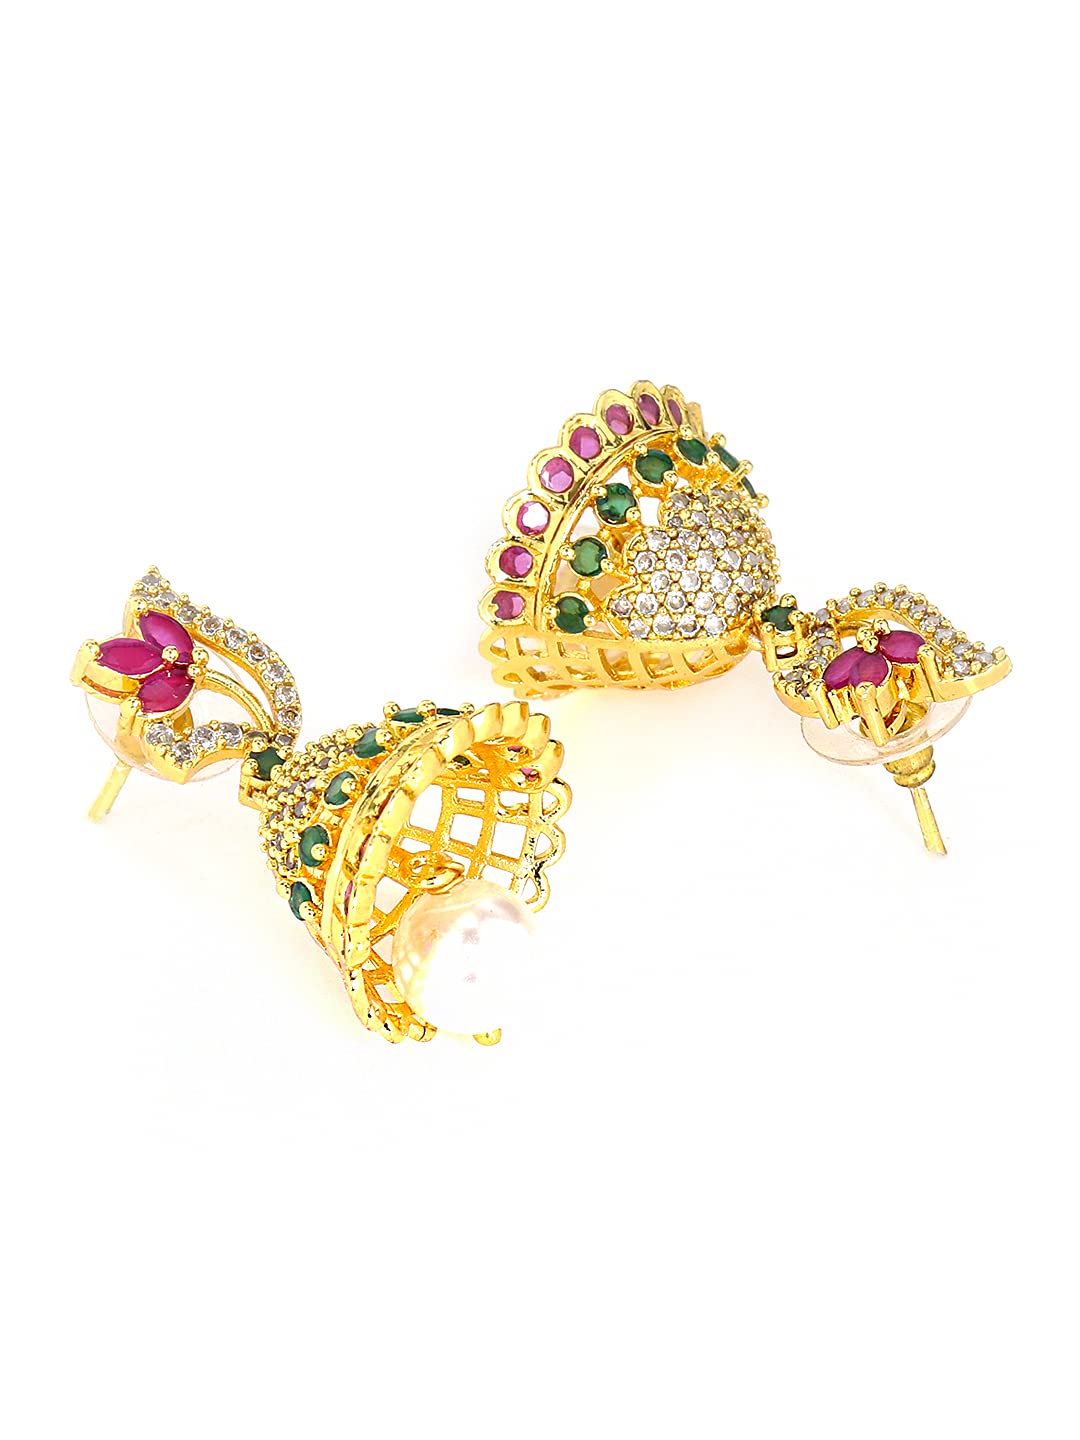 Yellow Chimes Classic AD/American Diamond Studded Pink Floral Design Pearl Drop Gold Plated Jhumka Jhumki Earrings for Women and Girls, Medium